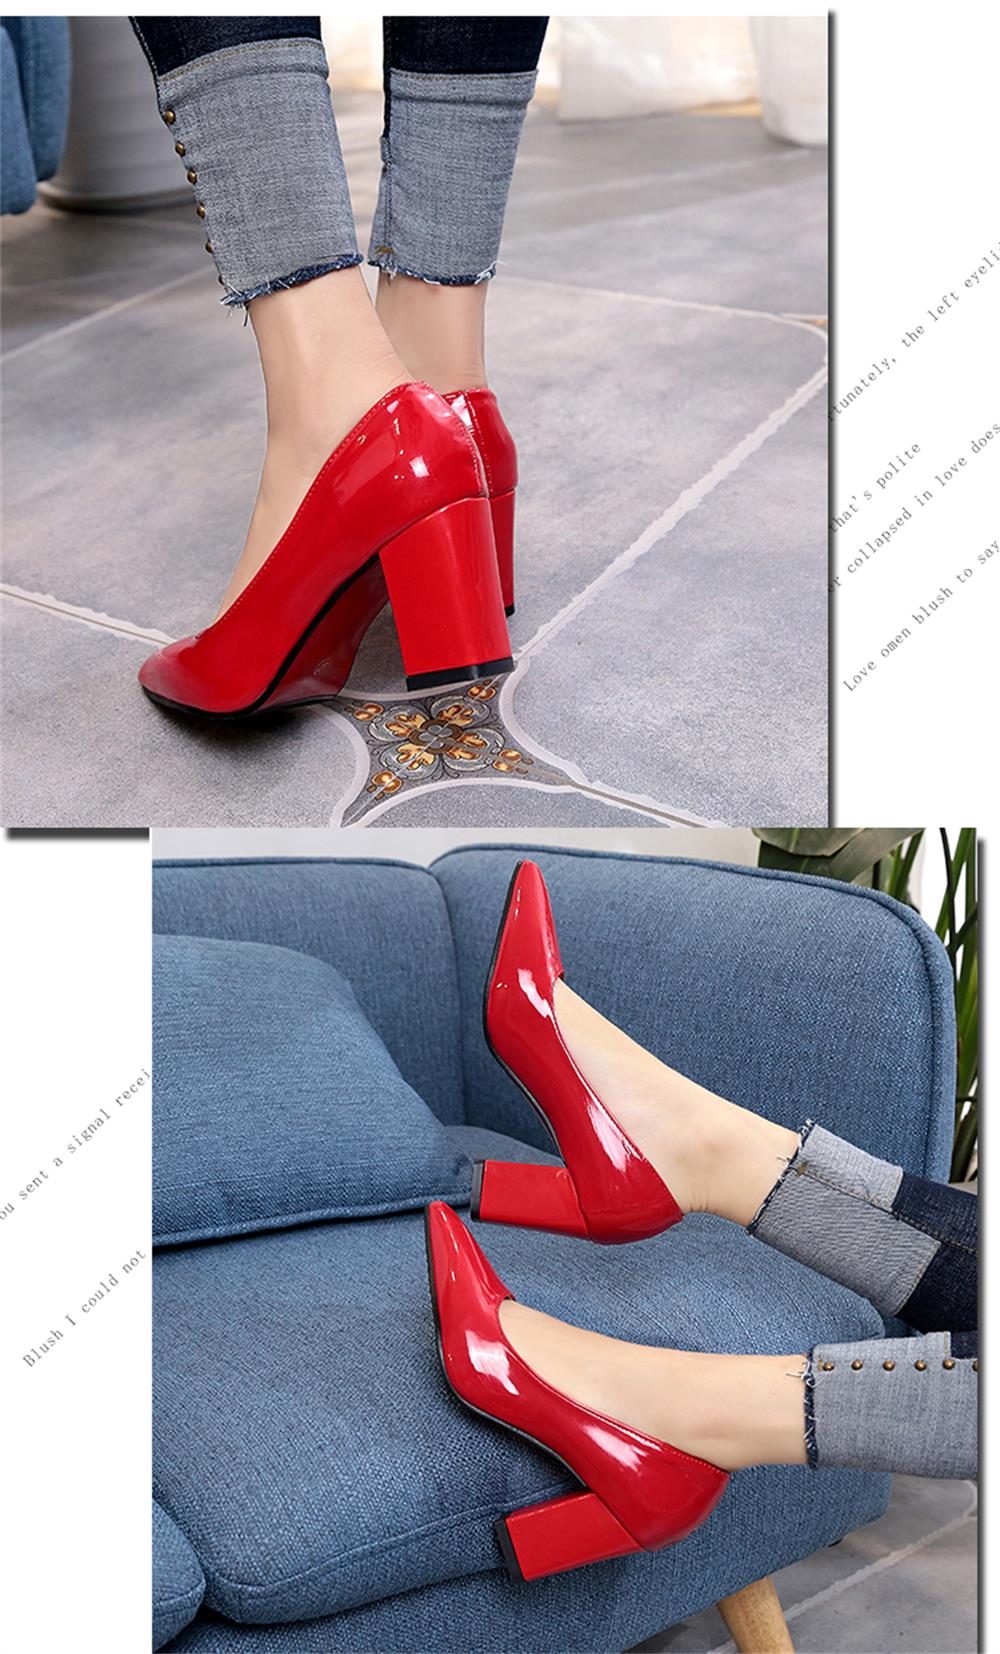 NJ-588 Nude Female Temperament High-heeled Feet Thick Shallow Muzzle Pointed Shoes Merchandiser